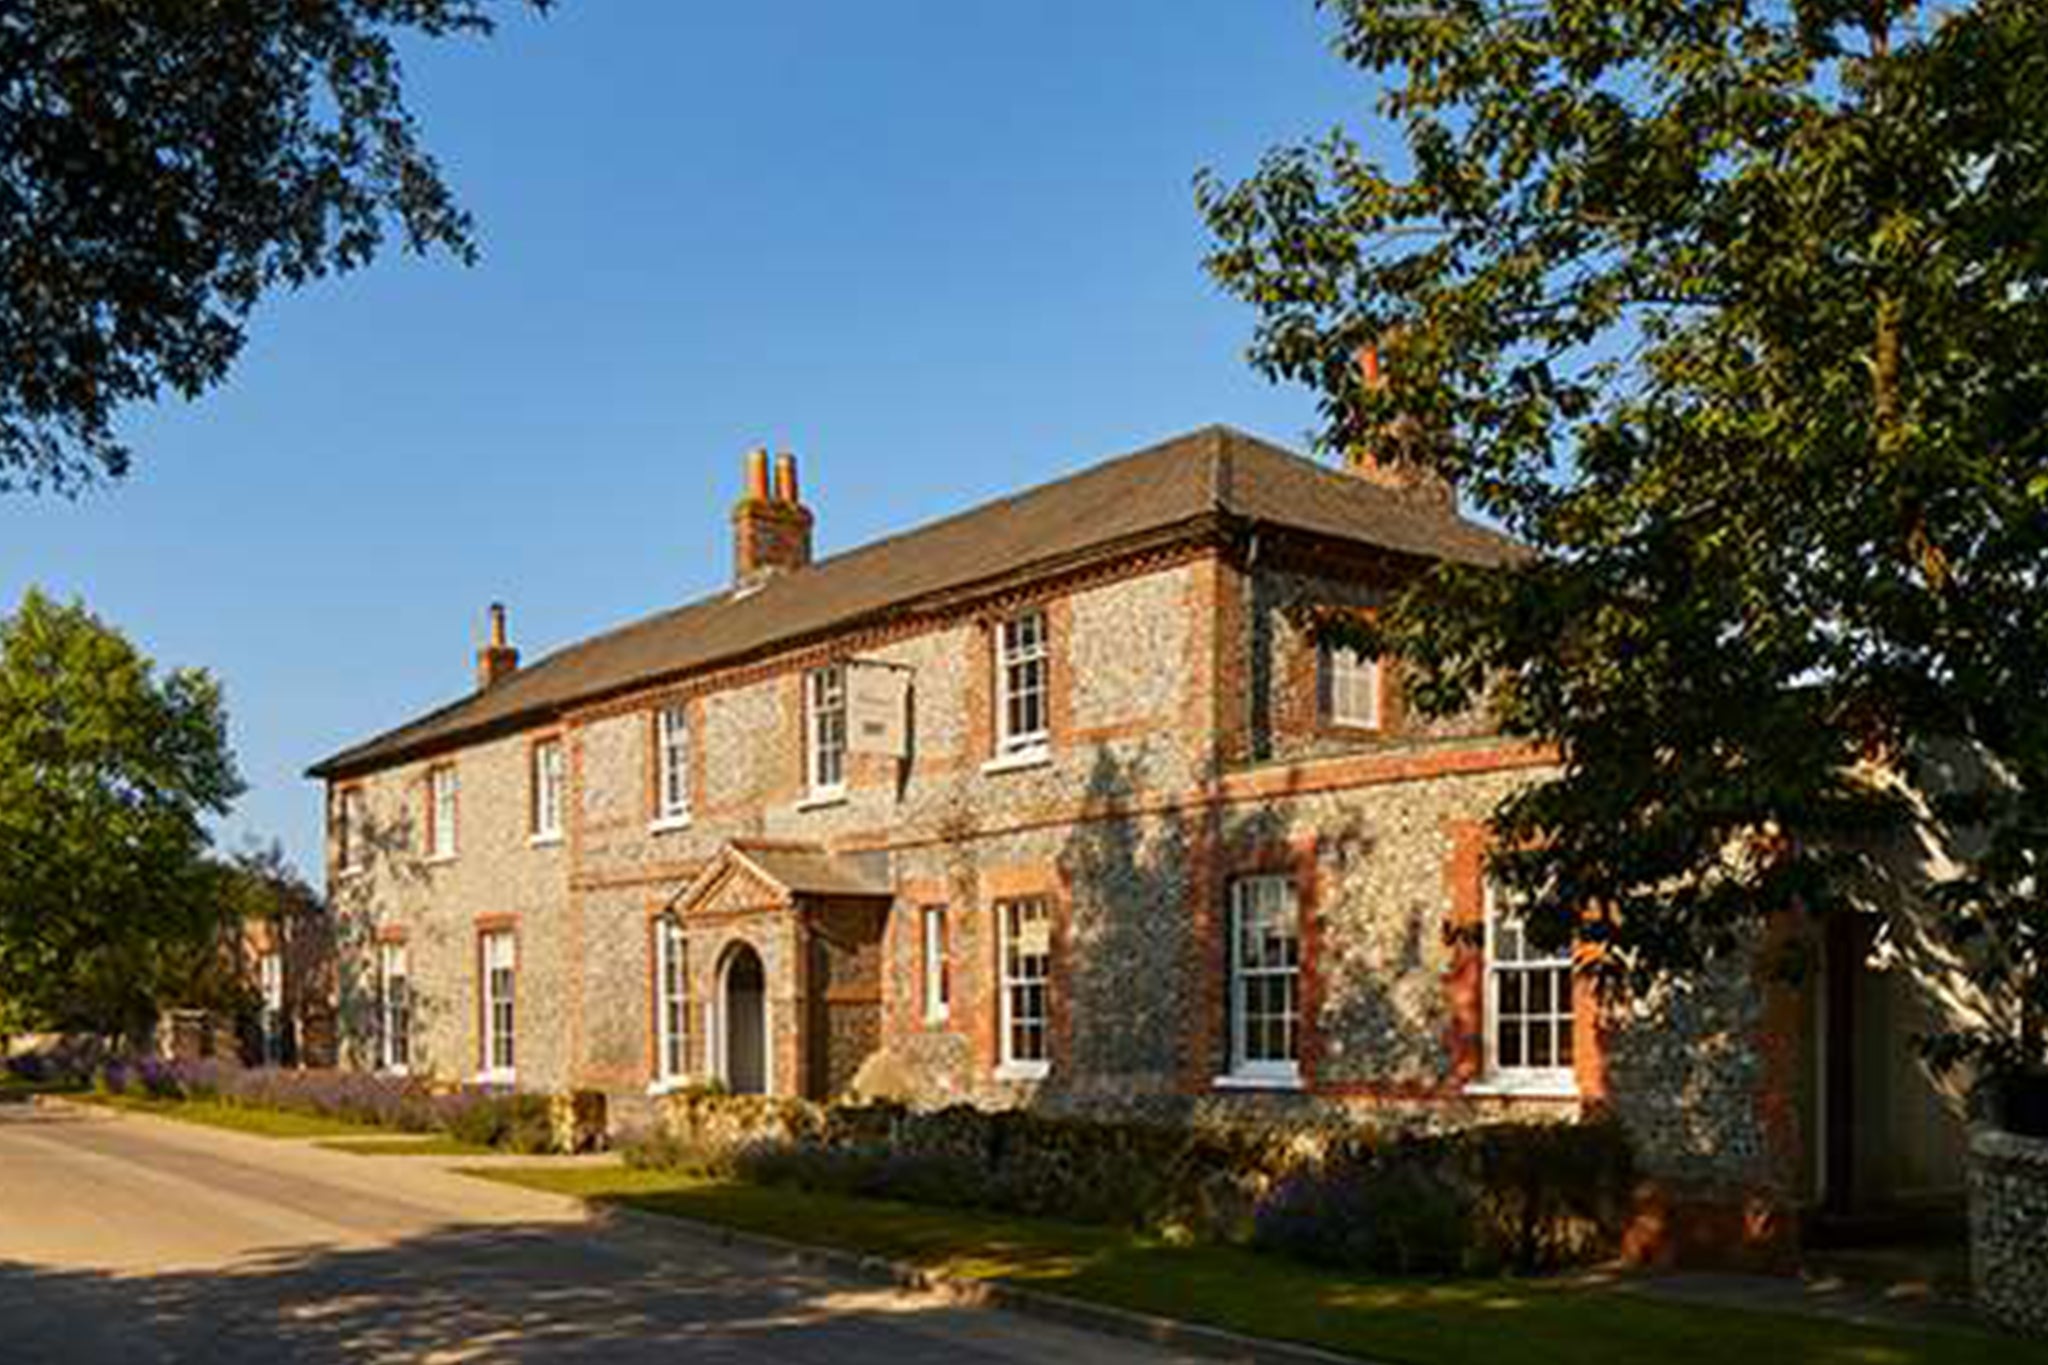 A quintessentially English countryside escape in West Sussex